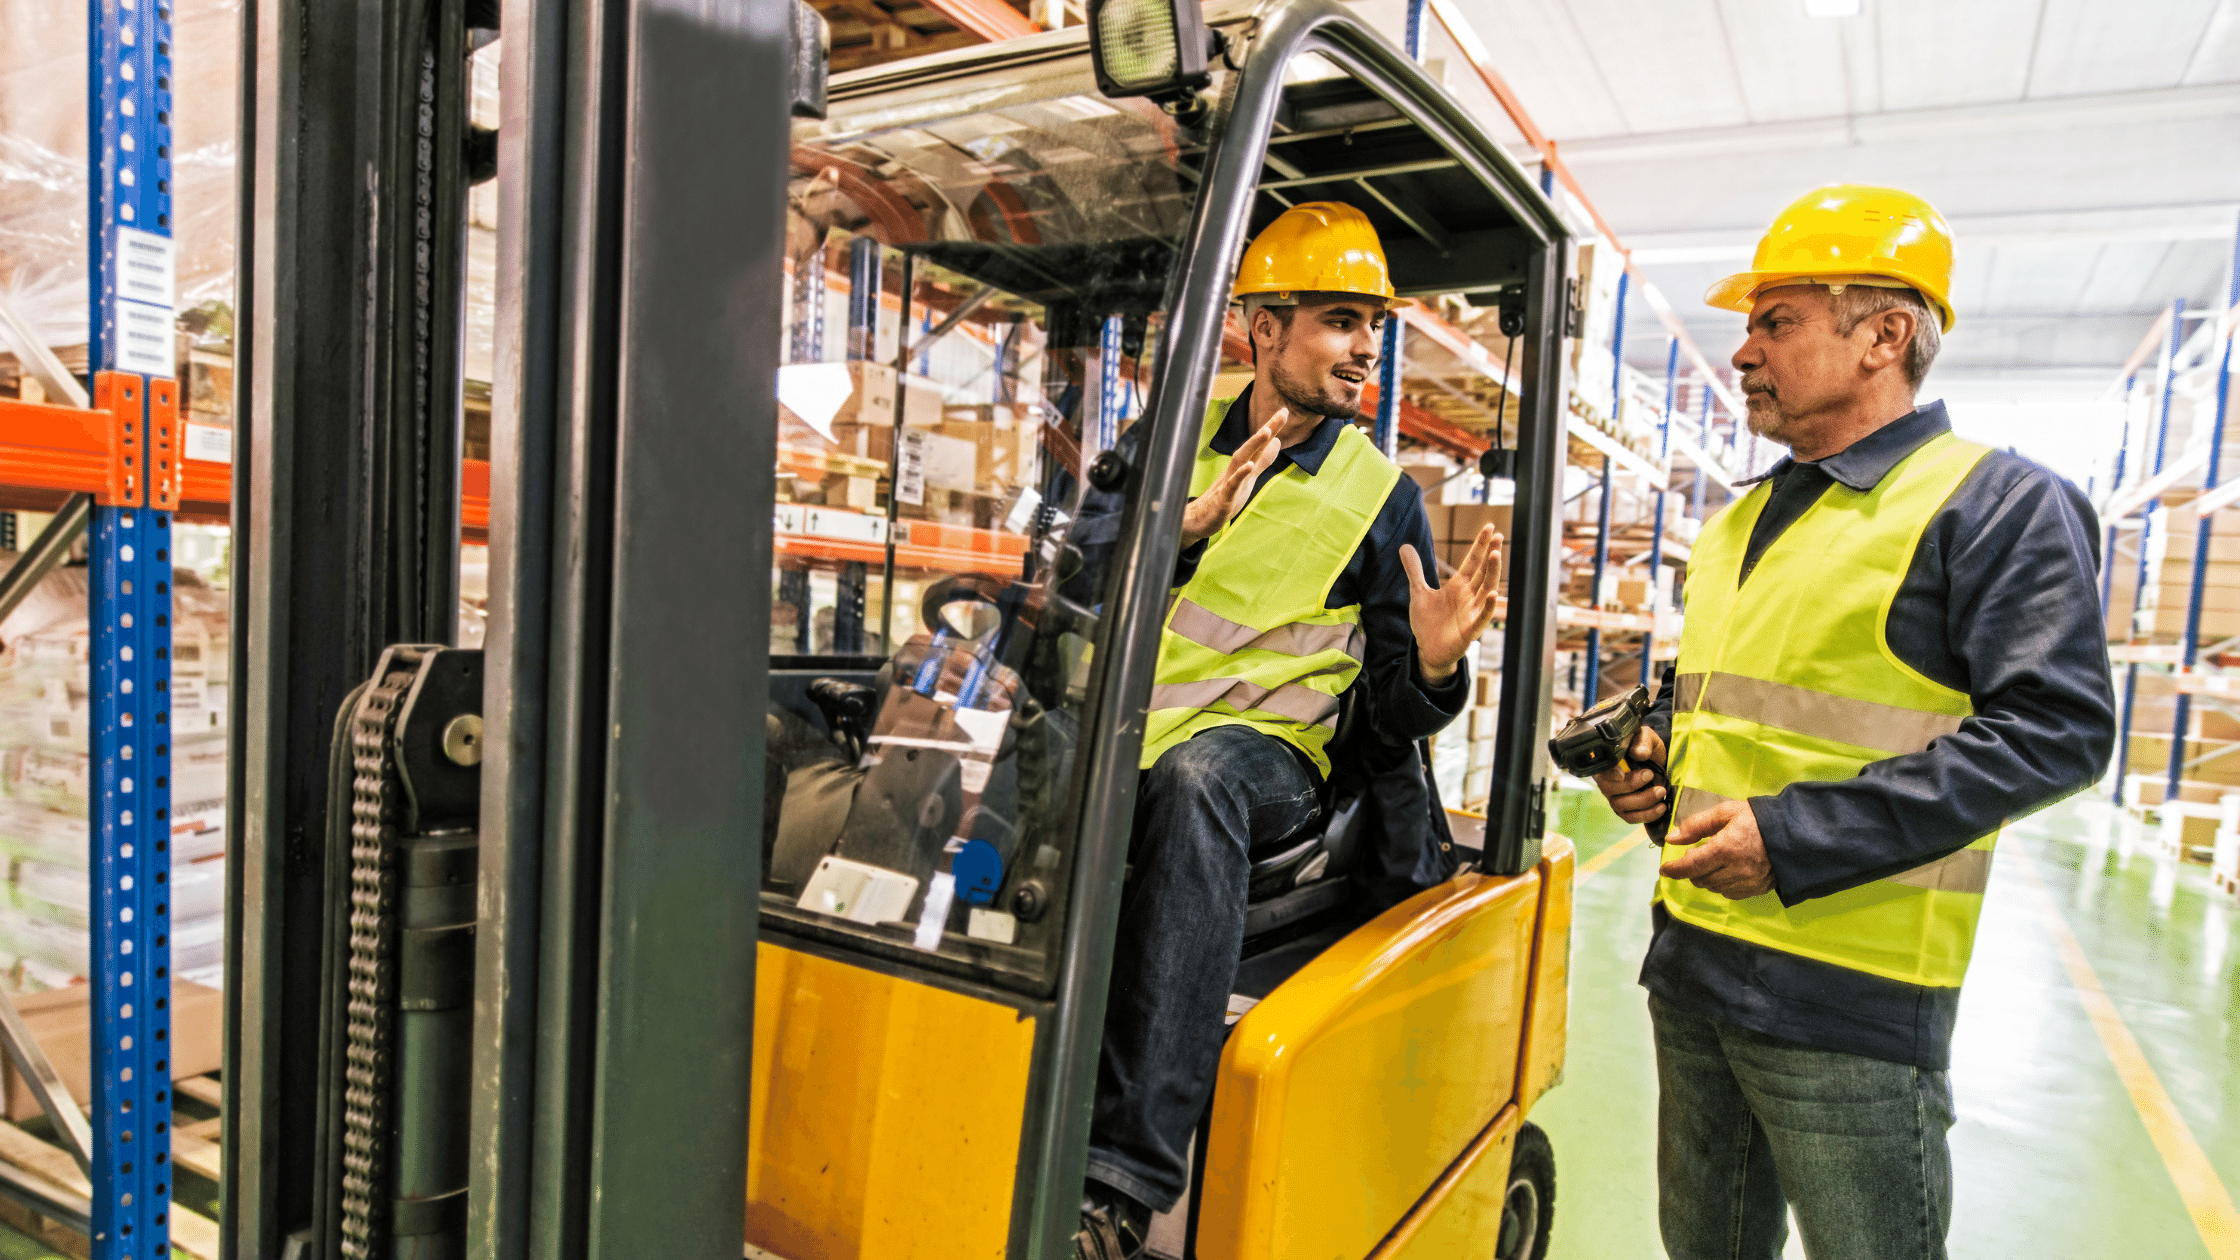 employees working on a forklift